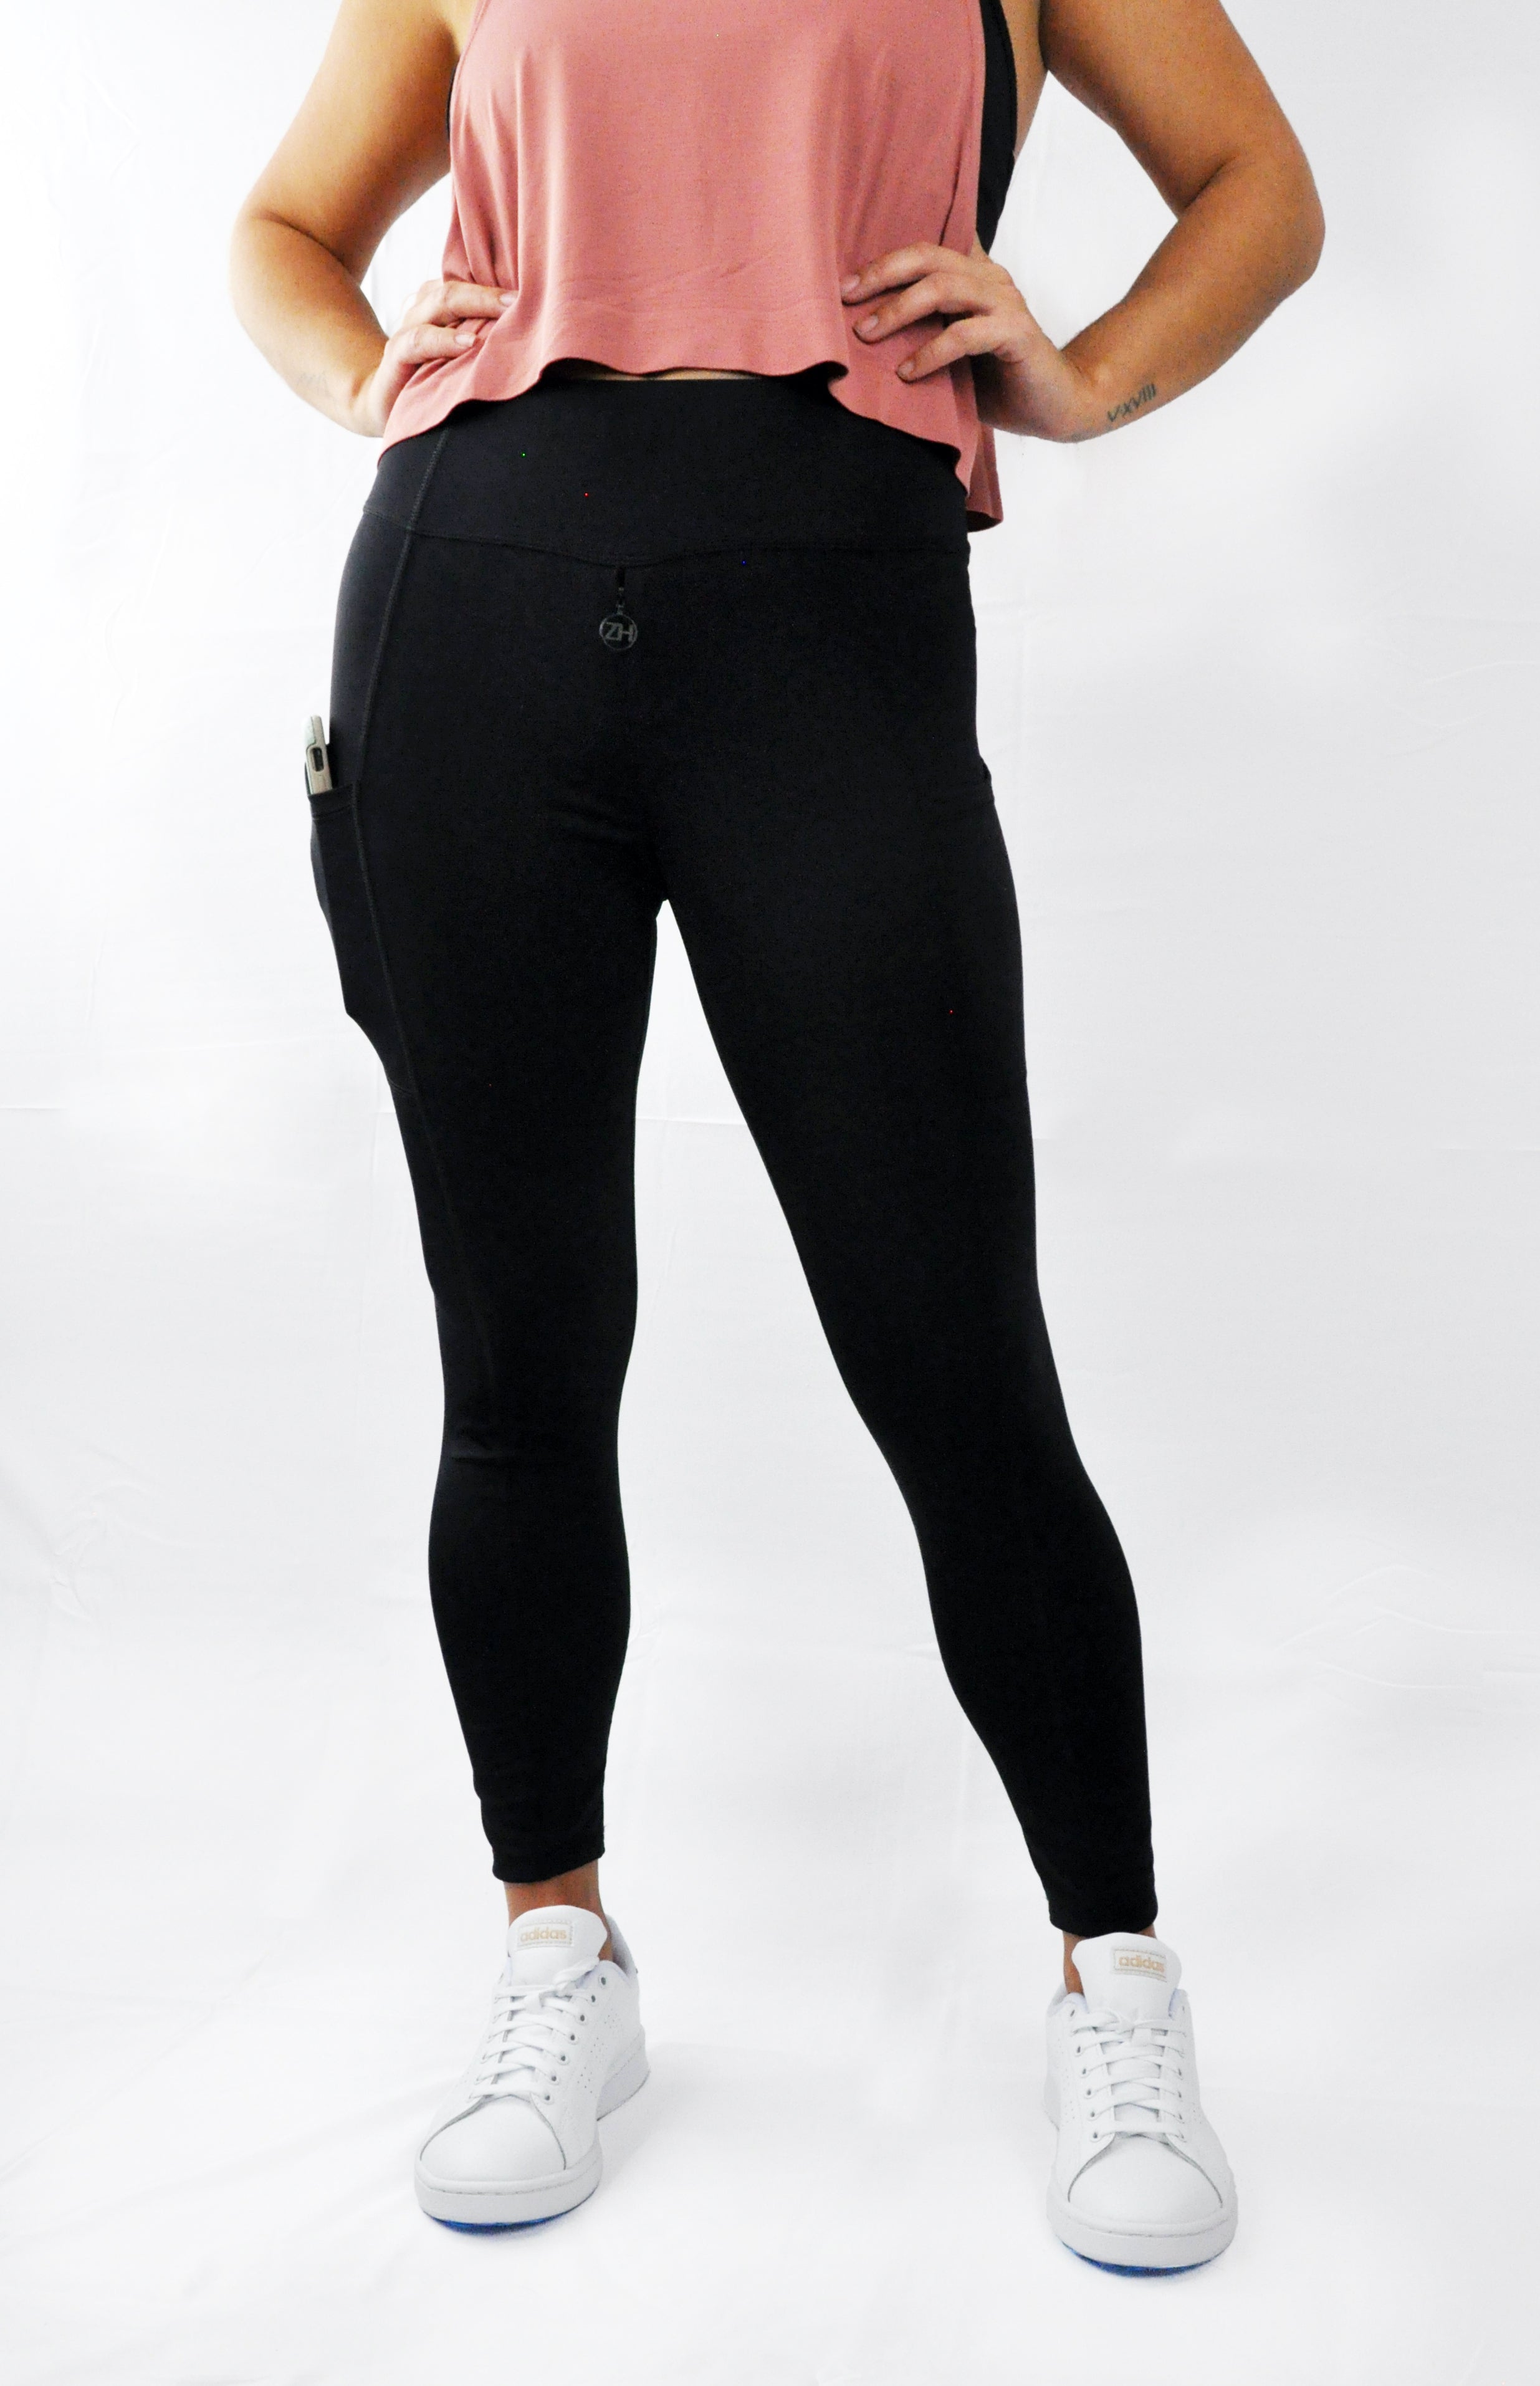 Its Zip Hers! Athletic wear that allows women to pee without pulling t